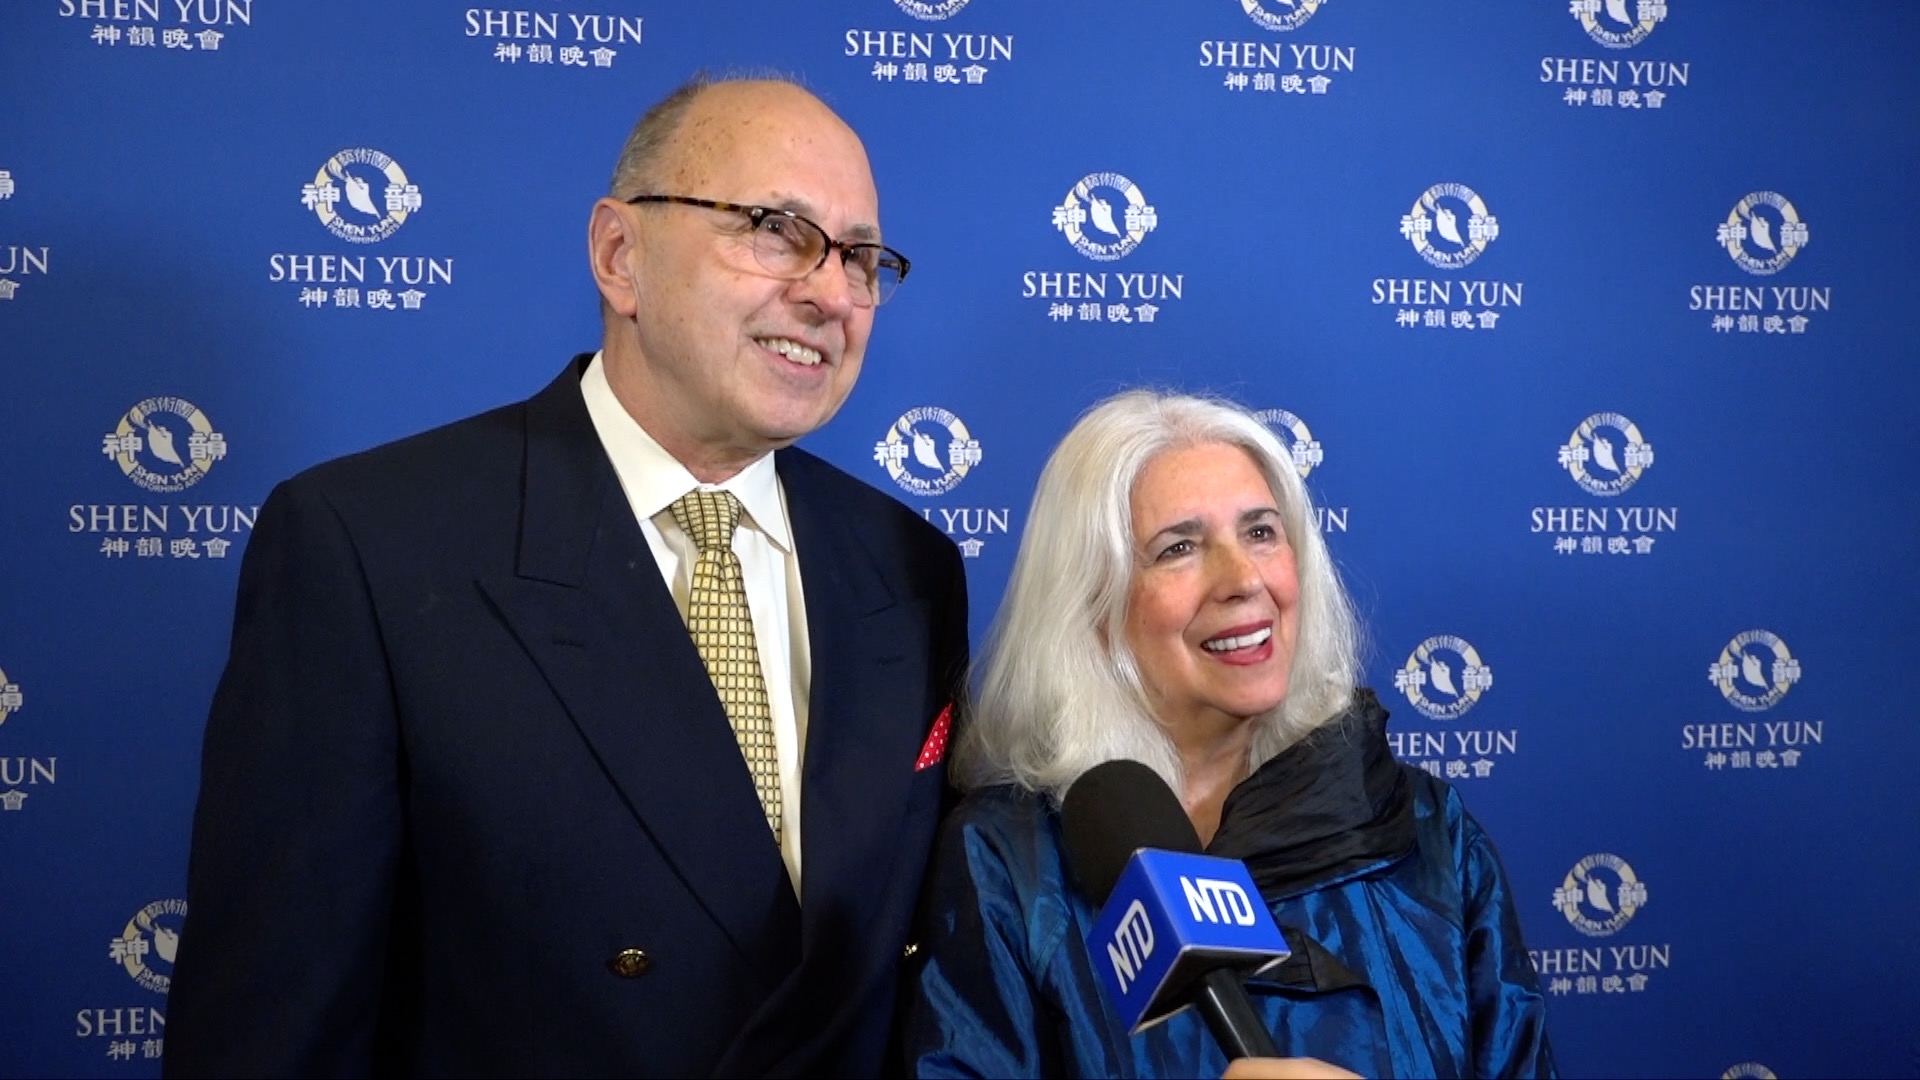 Shen Yun ‘A Once in a Lifetime’ Experience, Says Audience